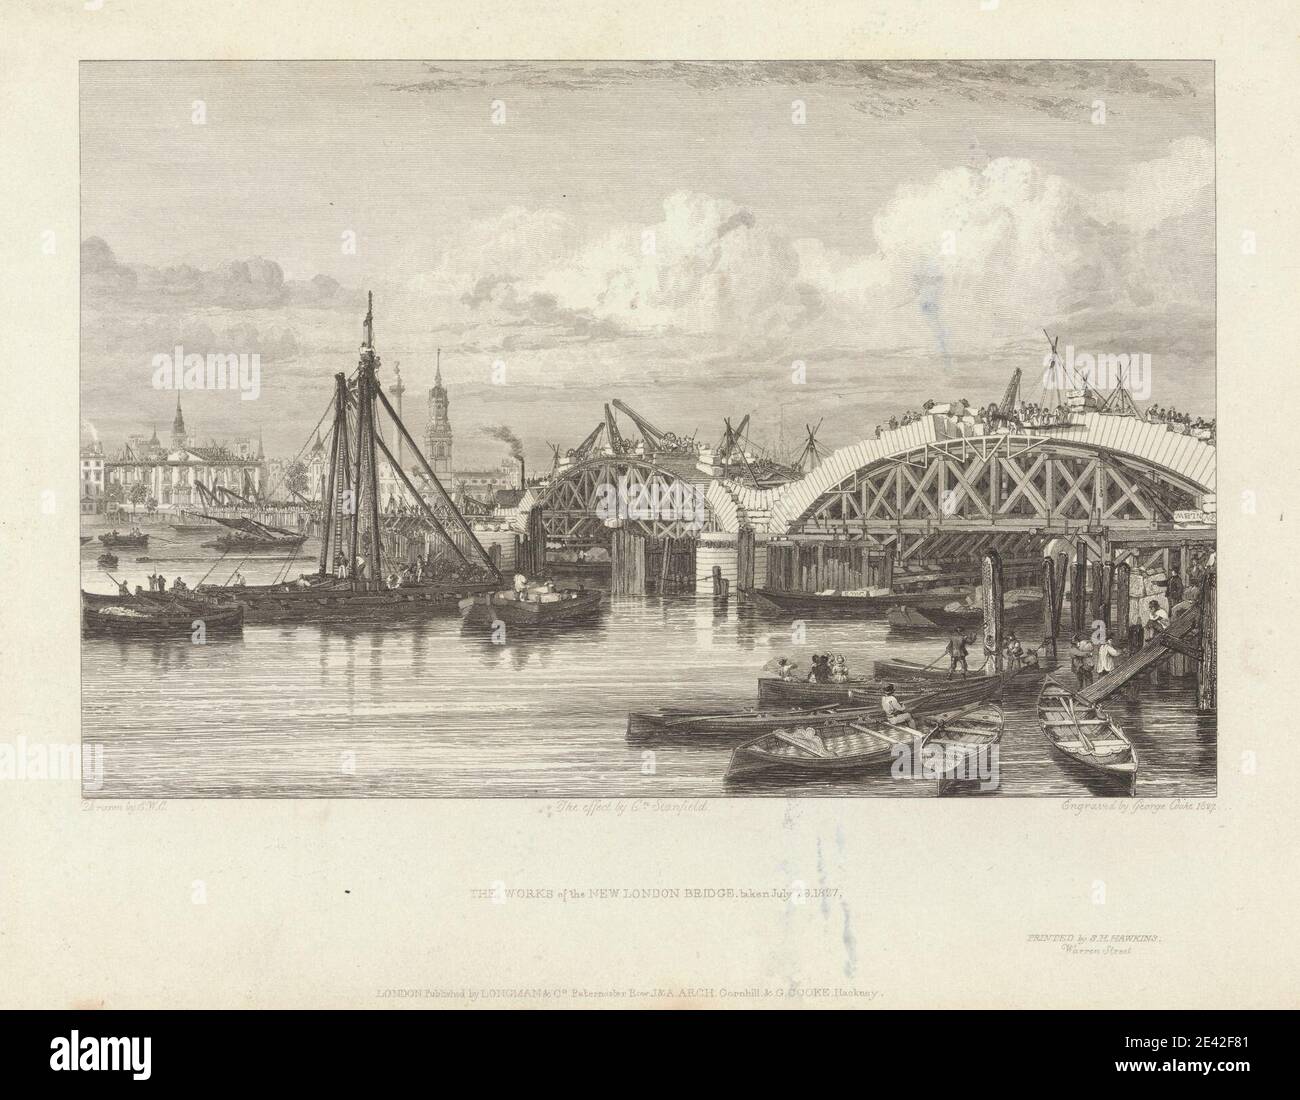 George Cooke, 1781â€"1834, British, The Works of the New London Bridge, 1827. Gravure. Banque D'Images